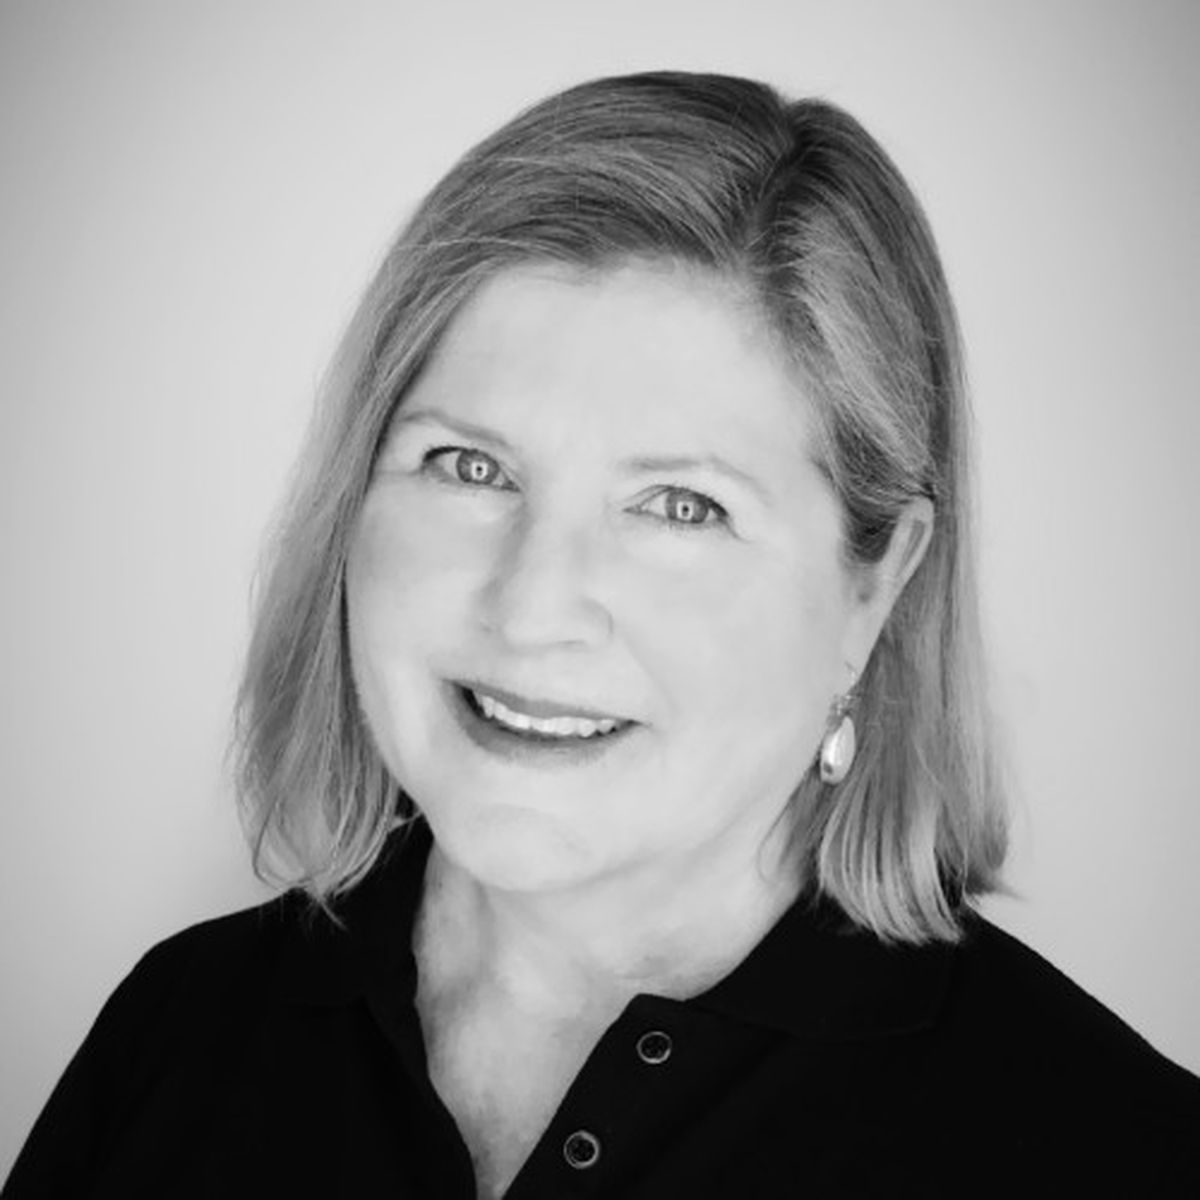 Author: Carrie Reber, product marketing manager, N-able